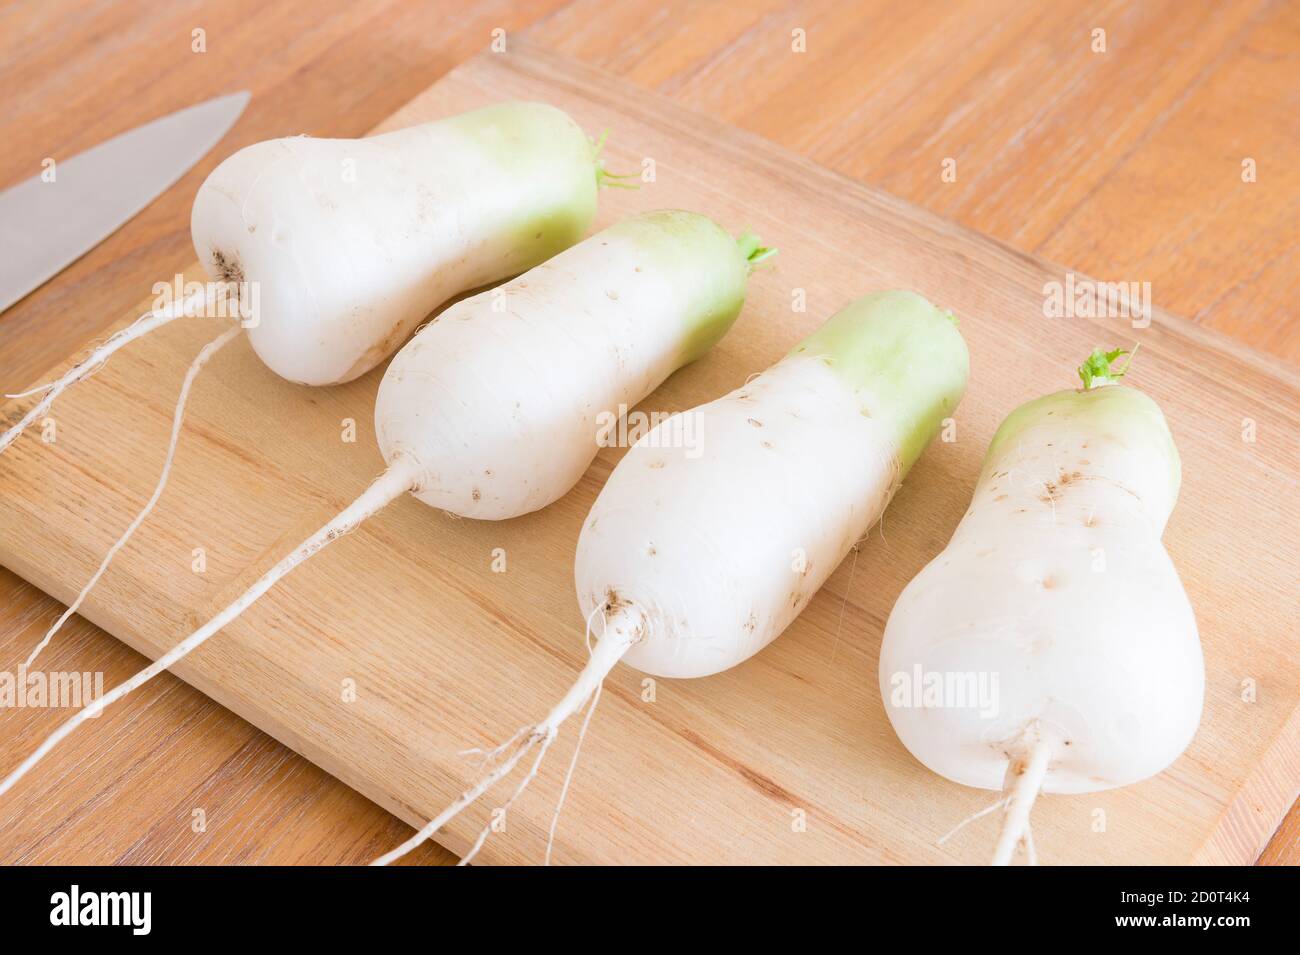 Raw mooli radish (daikon) roots on a chopping board and kitchen table. Organic homegrown vegetables in UK Stock Photo